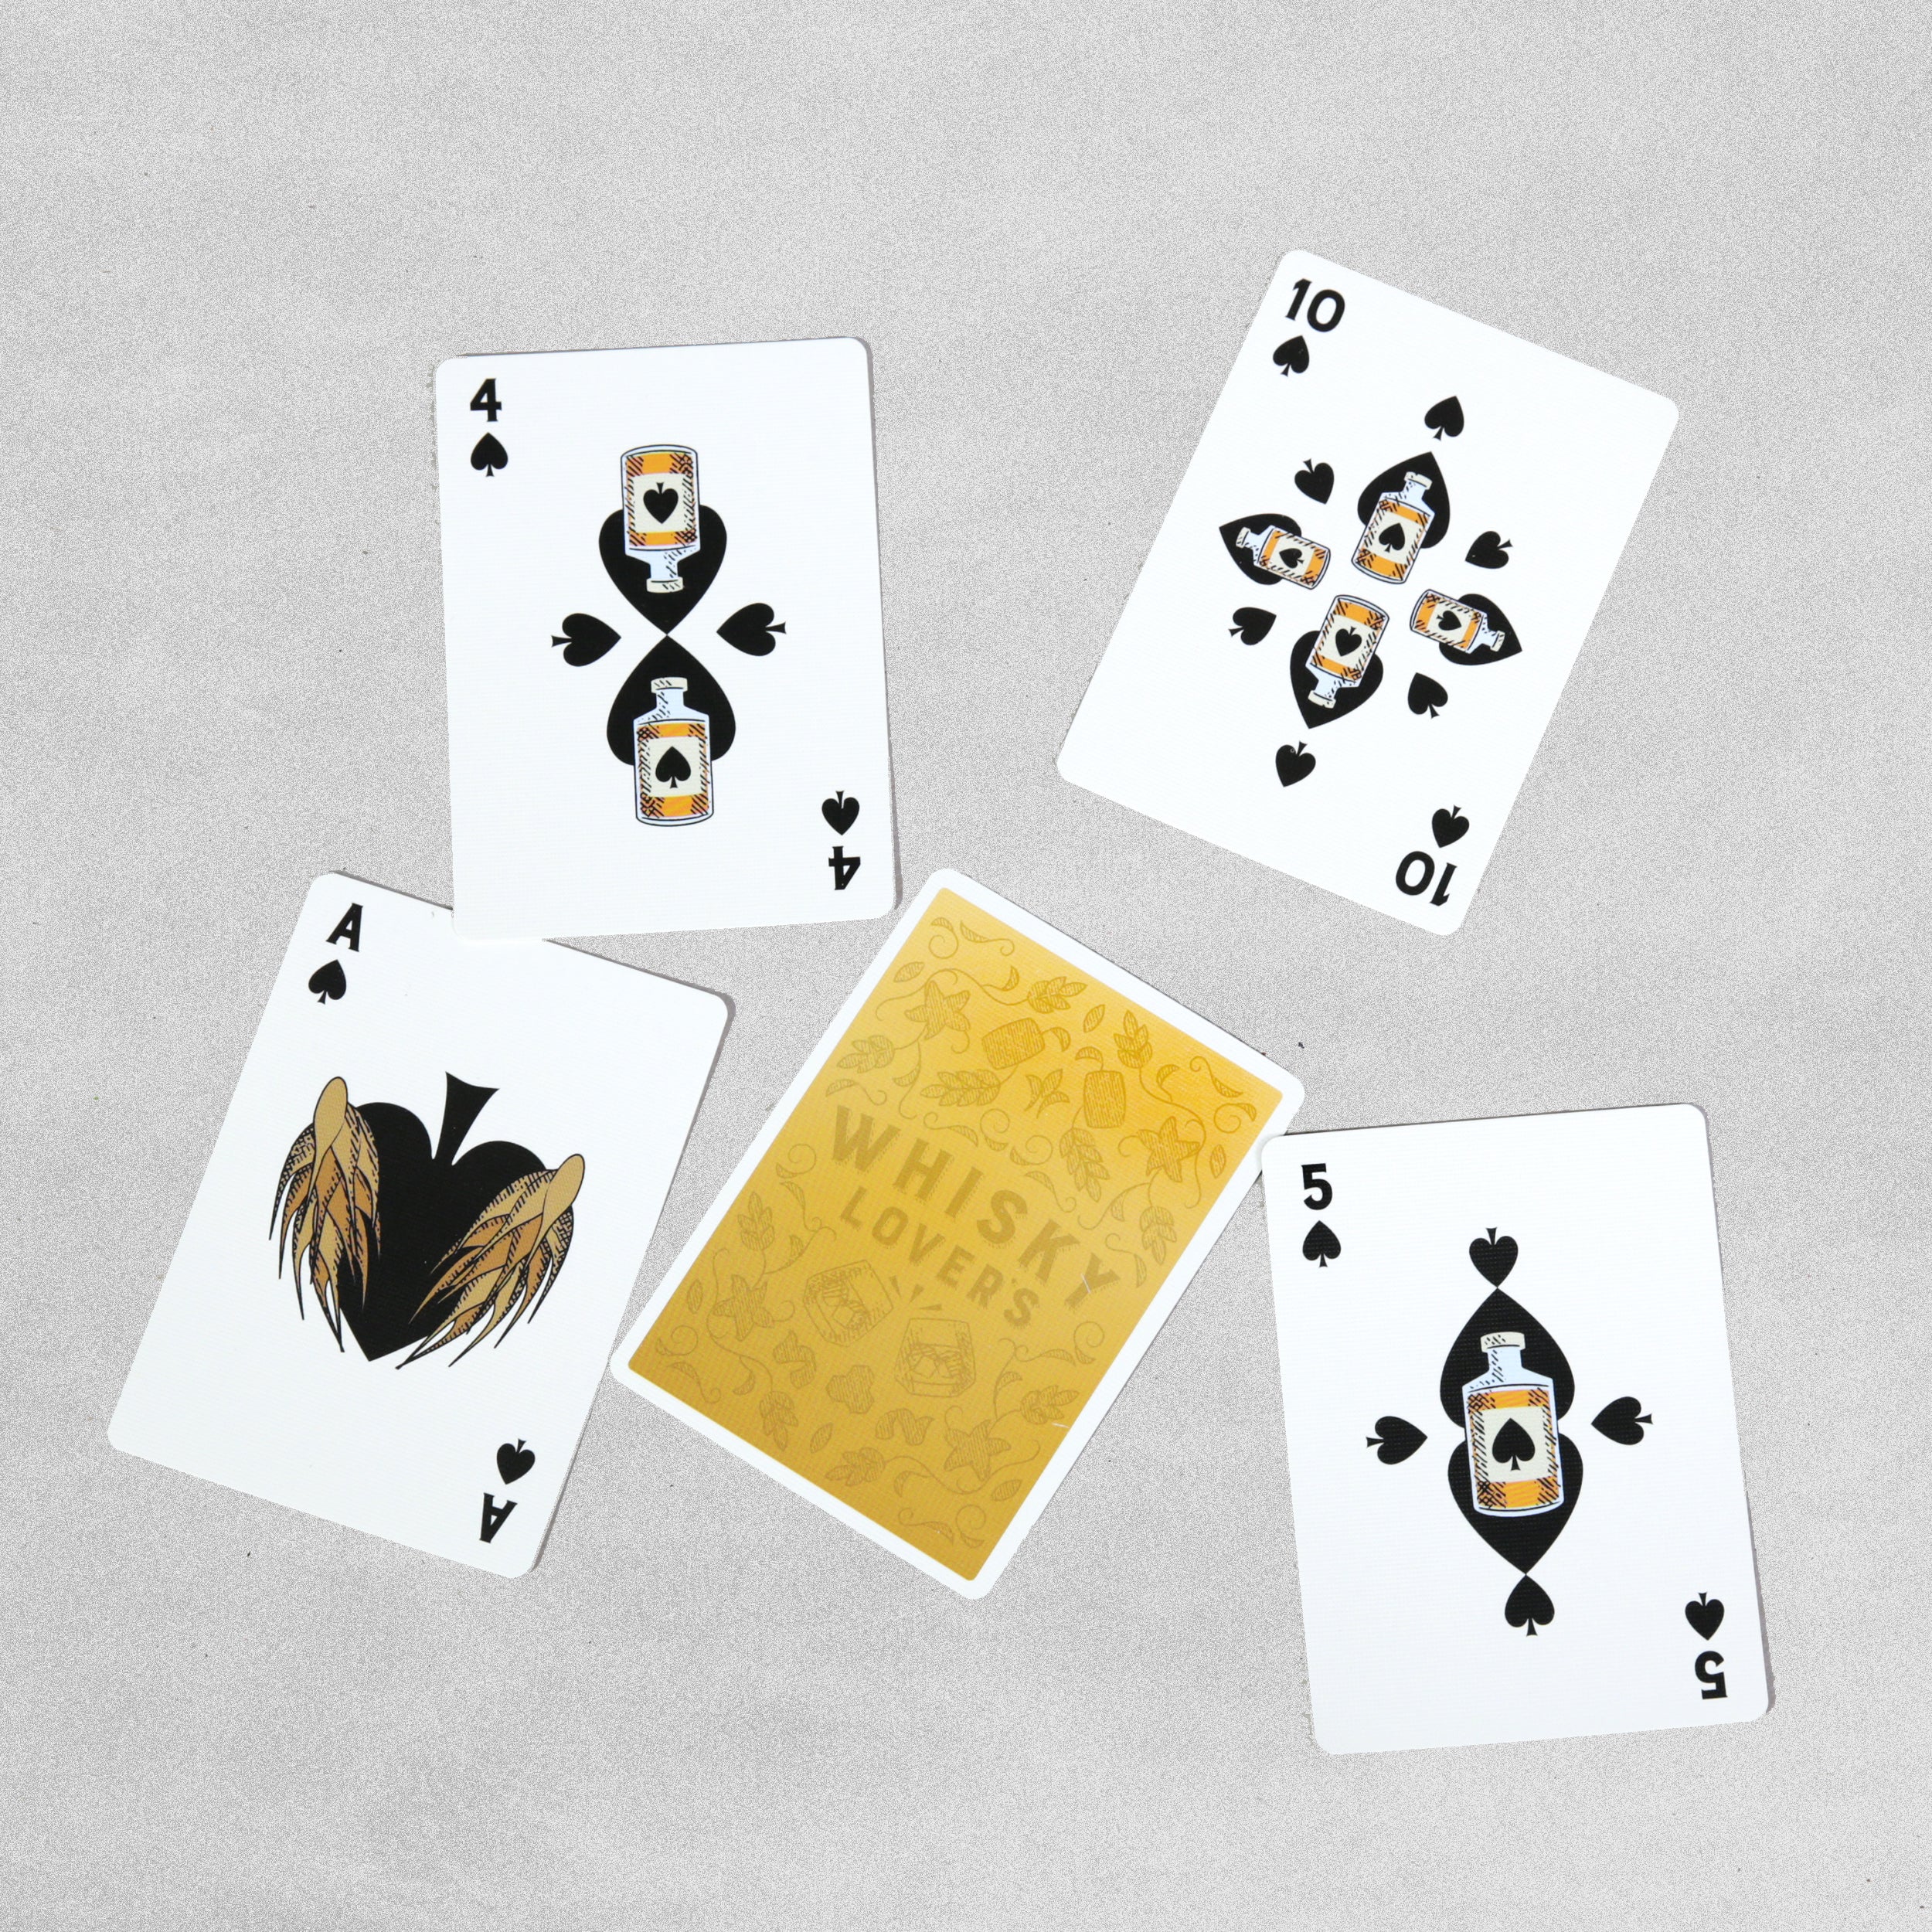 Whiskey Lover's - Illustrated Playing Cards